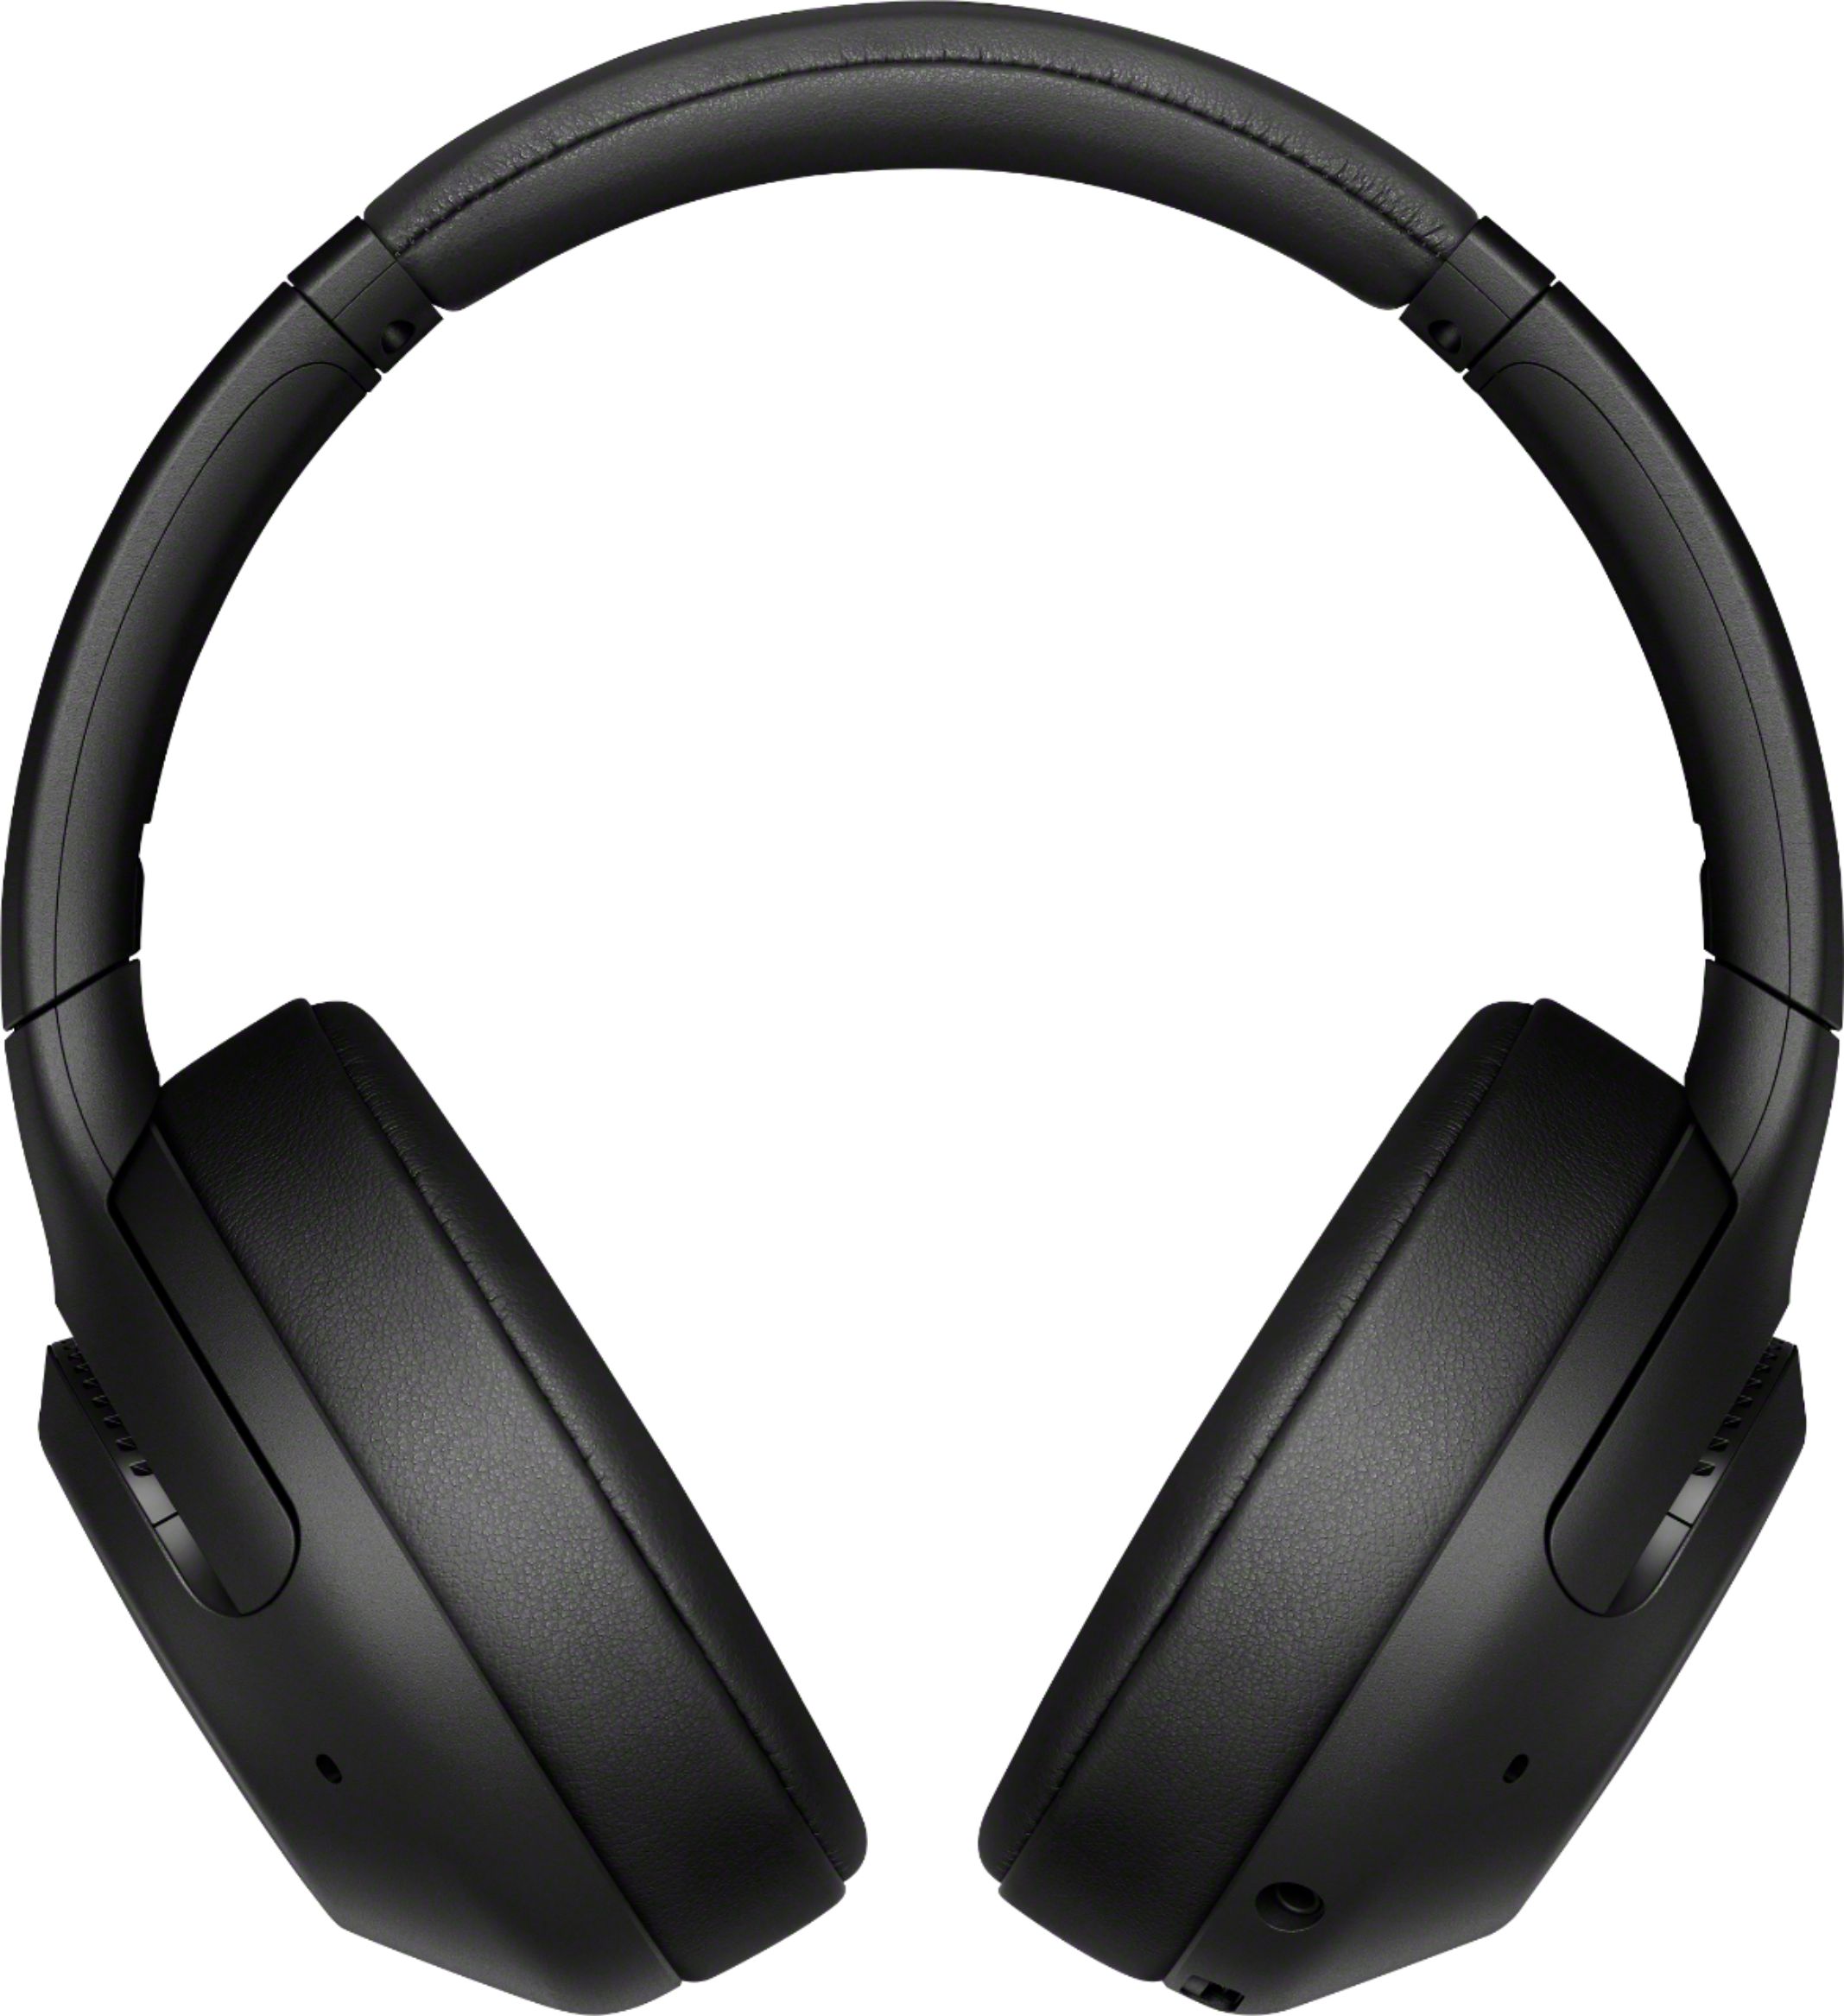 Angle View: Sony - WH-XB900N Wireless Noise Cancelling Over-the-Ear Headphones - Black